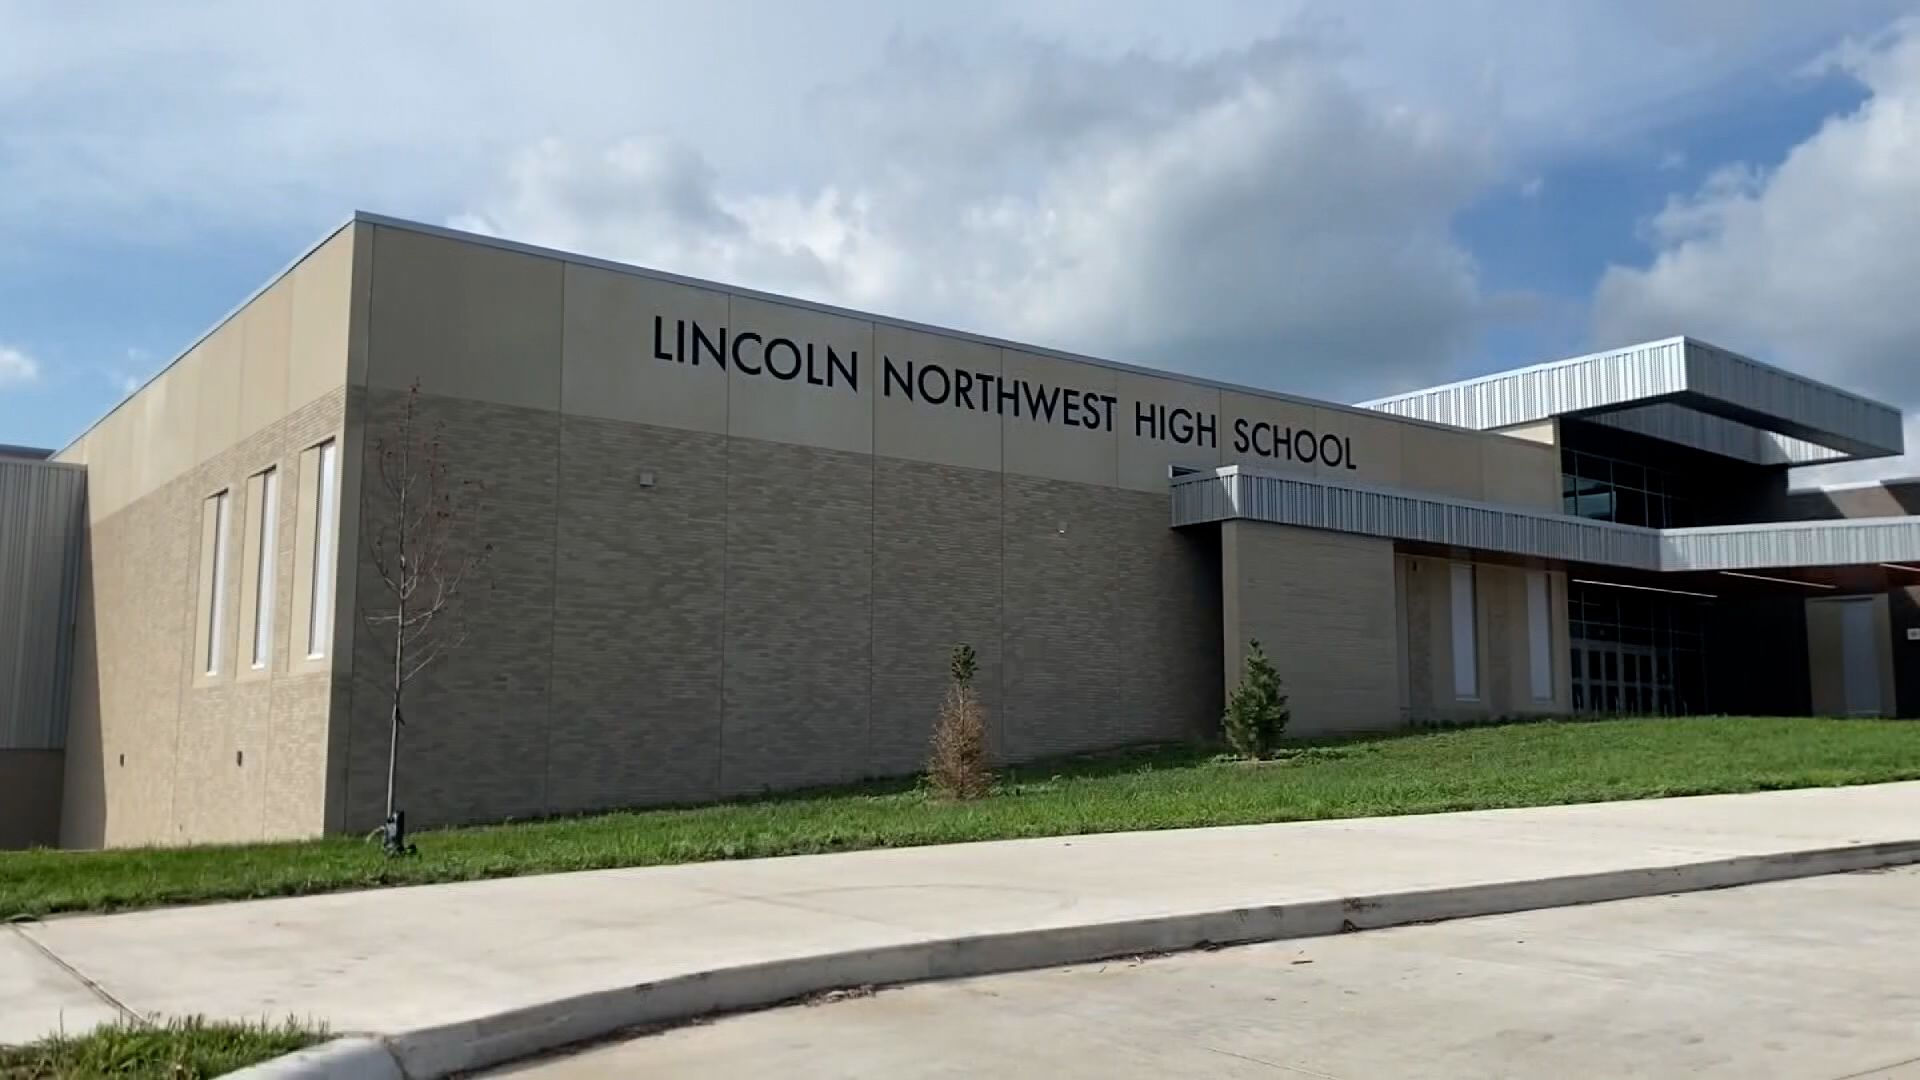 Schoollsex - Lincoln, Nebraska arrest: 26-year-old allegedly enrolled in high school and  sent sexually explicit text messages to underage students, police say | CNN